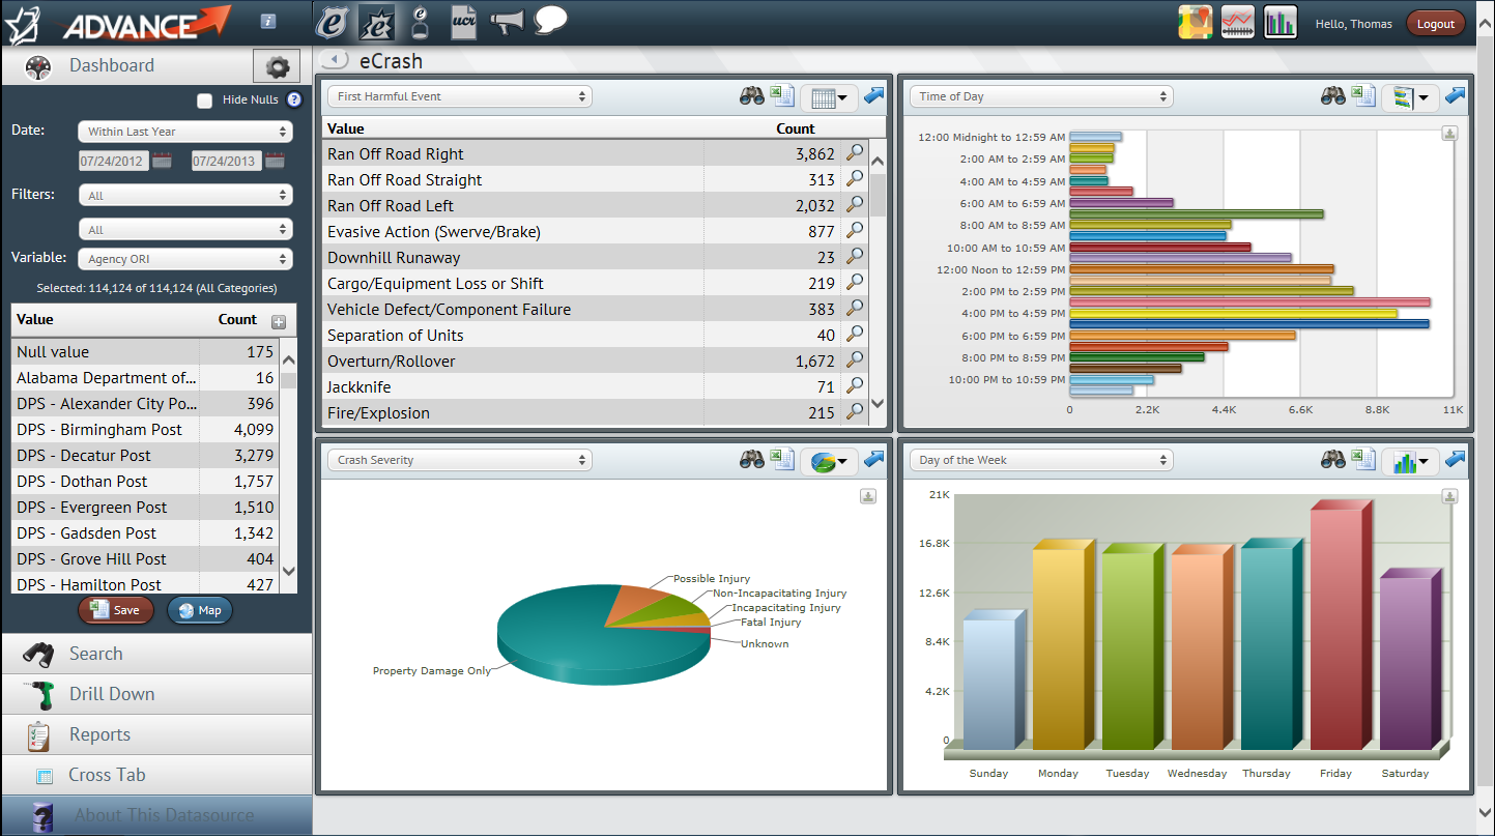 screenshot of the CAPS ADVANCE Portal dashboard, displaying five sections: a set of data filters and variables, a table of values, a horizontal bar chart, a pie chart, and a vertical bar chart